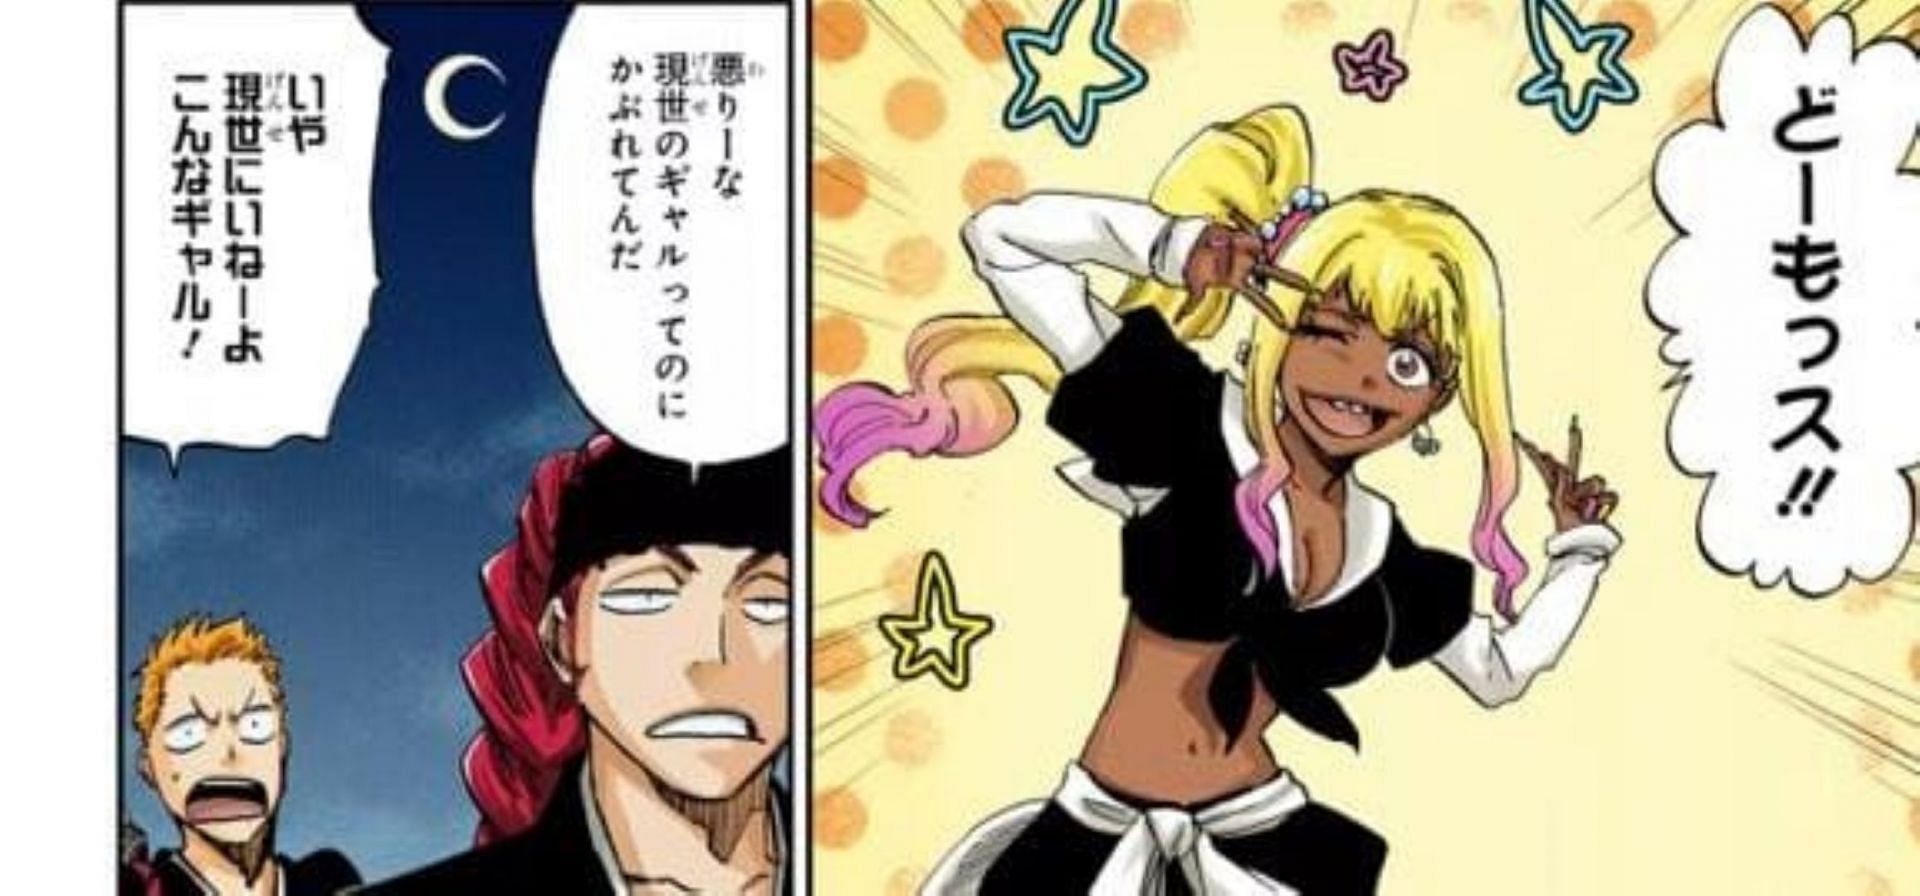 Bleach Hell arc colored oneshot manga proves to be fans' ultimate